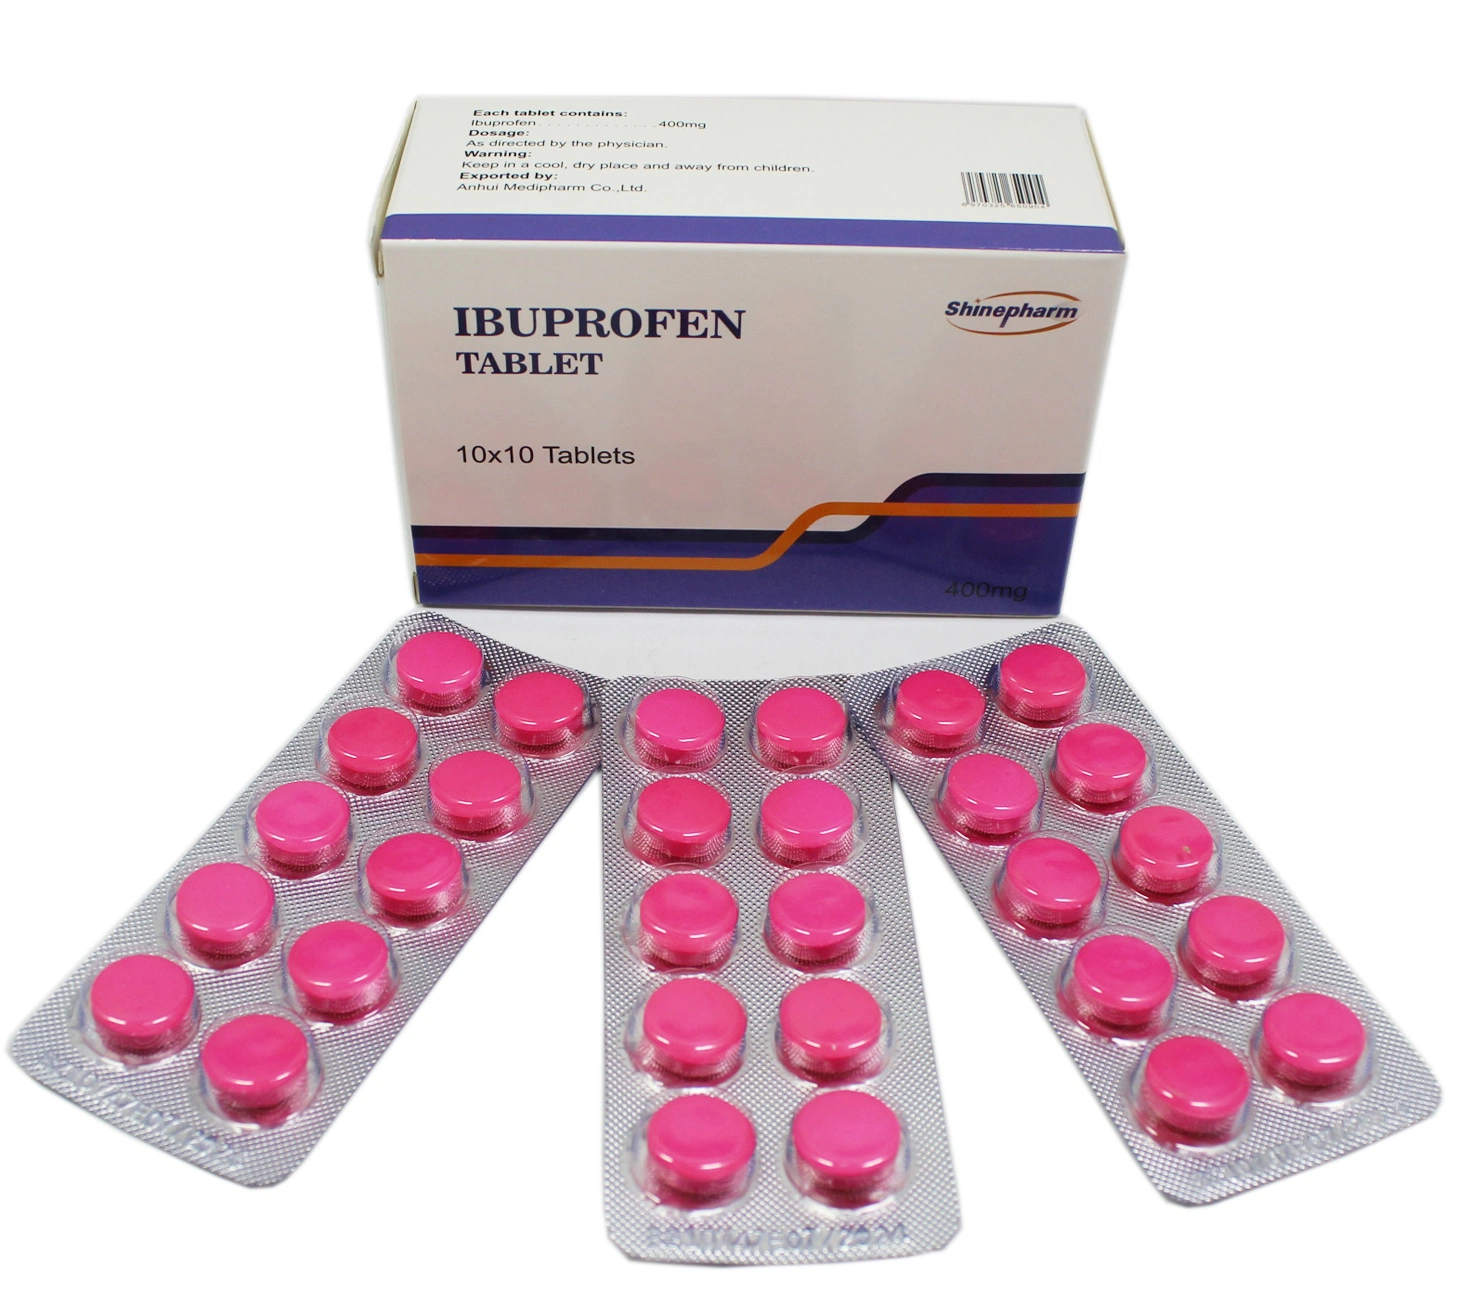 Ibuprofen Tablet 400mg for Antipyretic Analgesic and Anti-Inflammatory